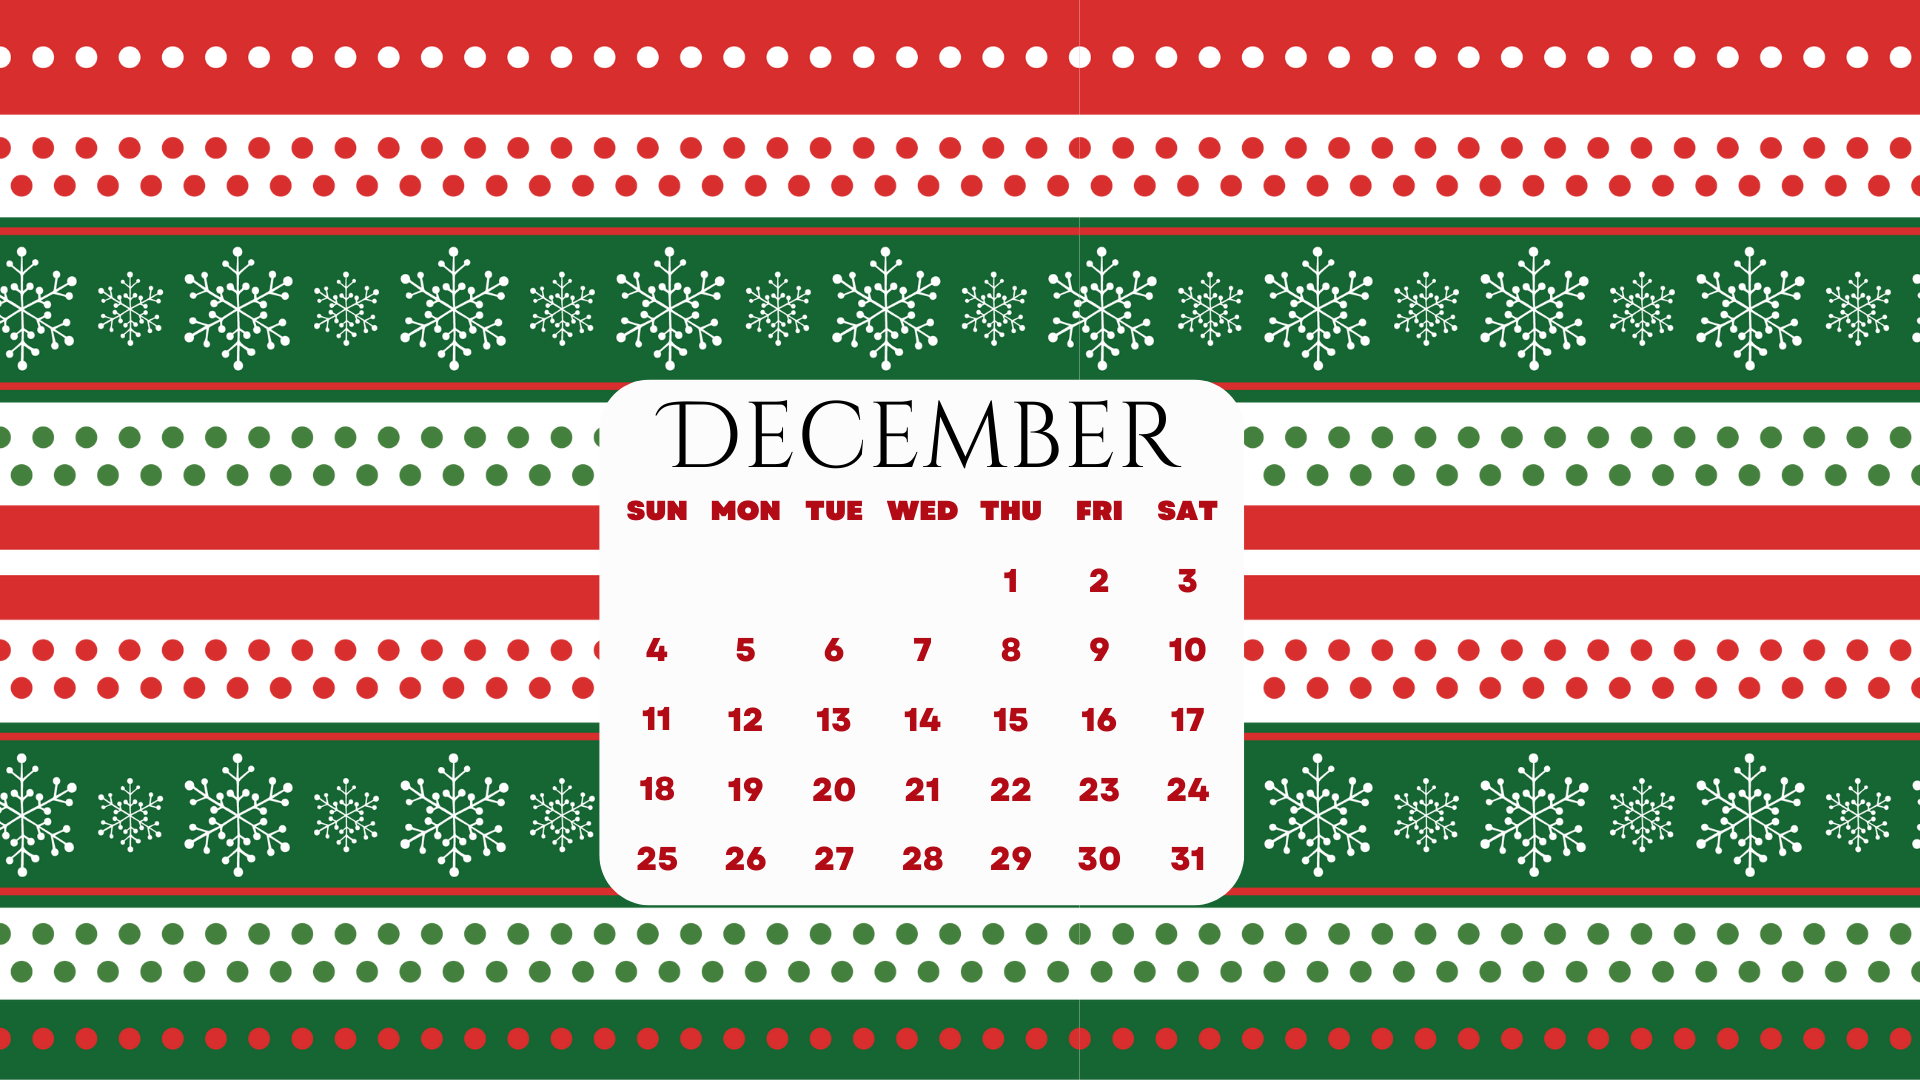 Free December 2022 Desktop Calendar Backgrounds; Here are your free December backgrounds for computers and laptops. Tech freebies for this month!